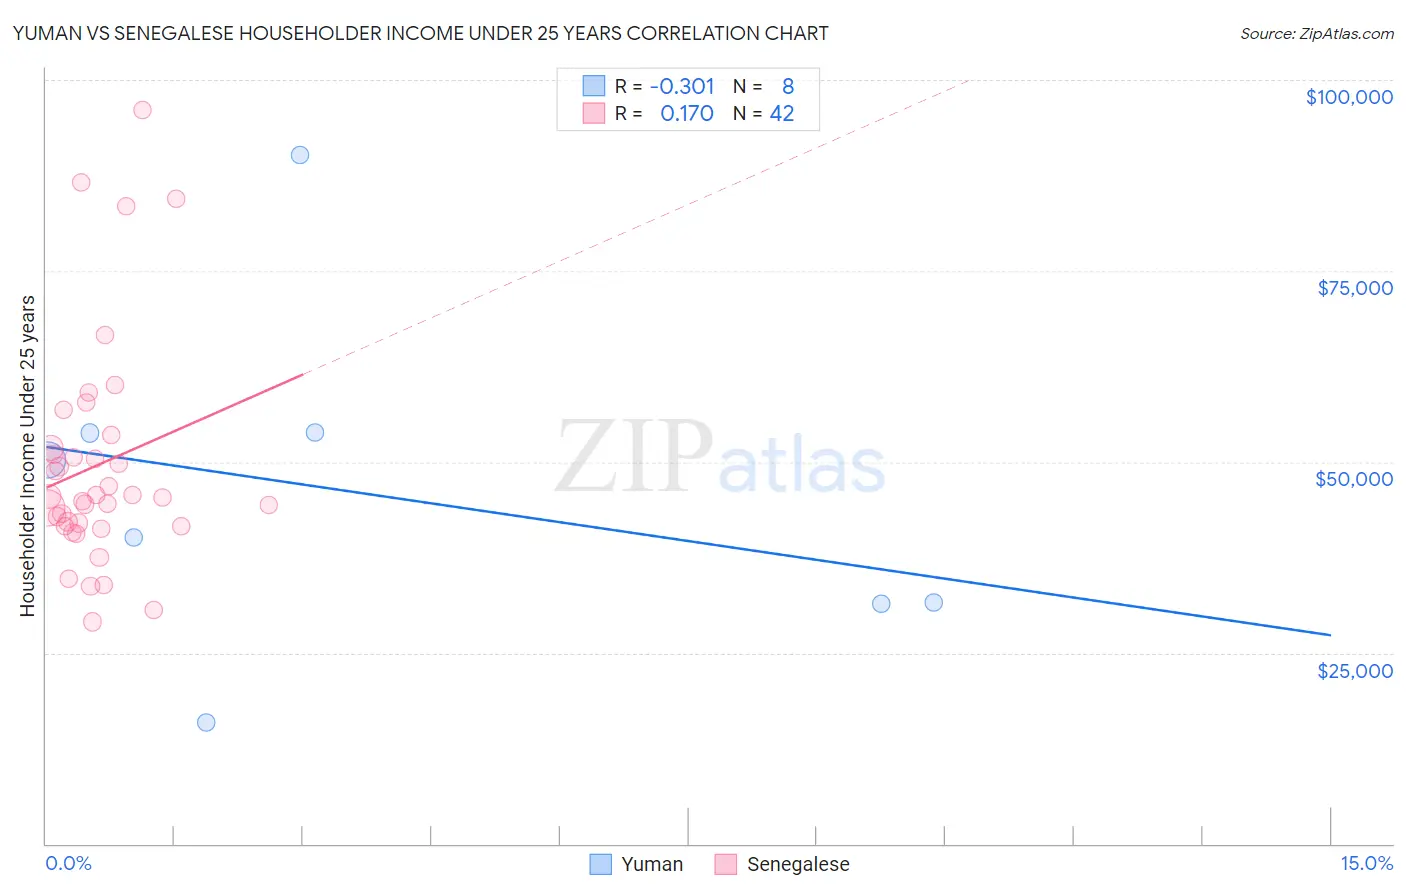 Yuman vs Senegalese Householder Income Under 25 years